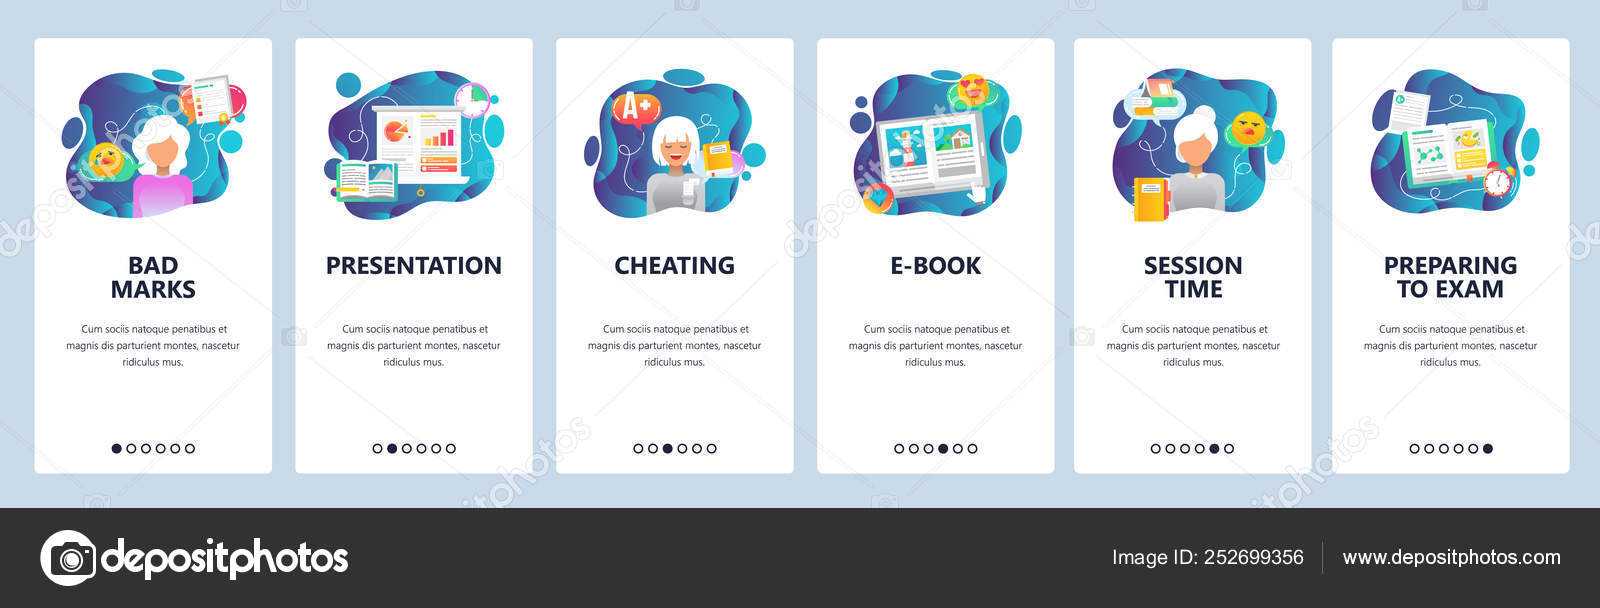 Mobile App Onboarding Screens. School And College Education With College Banner Template